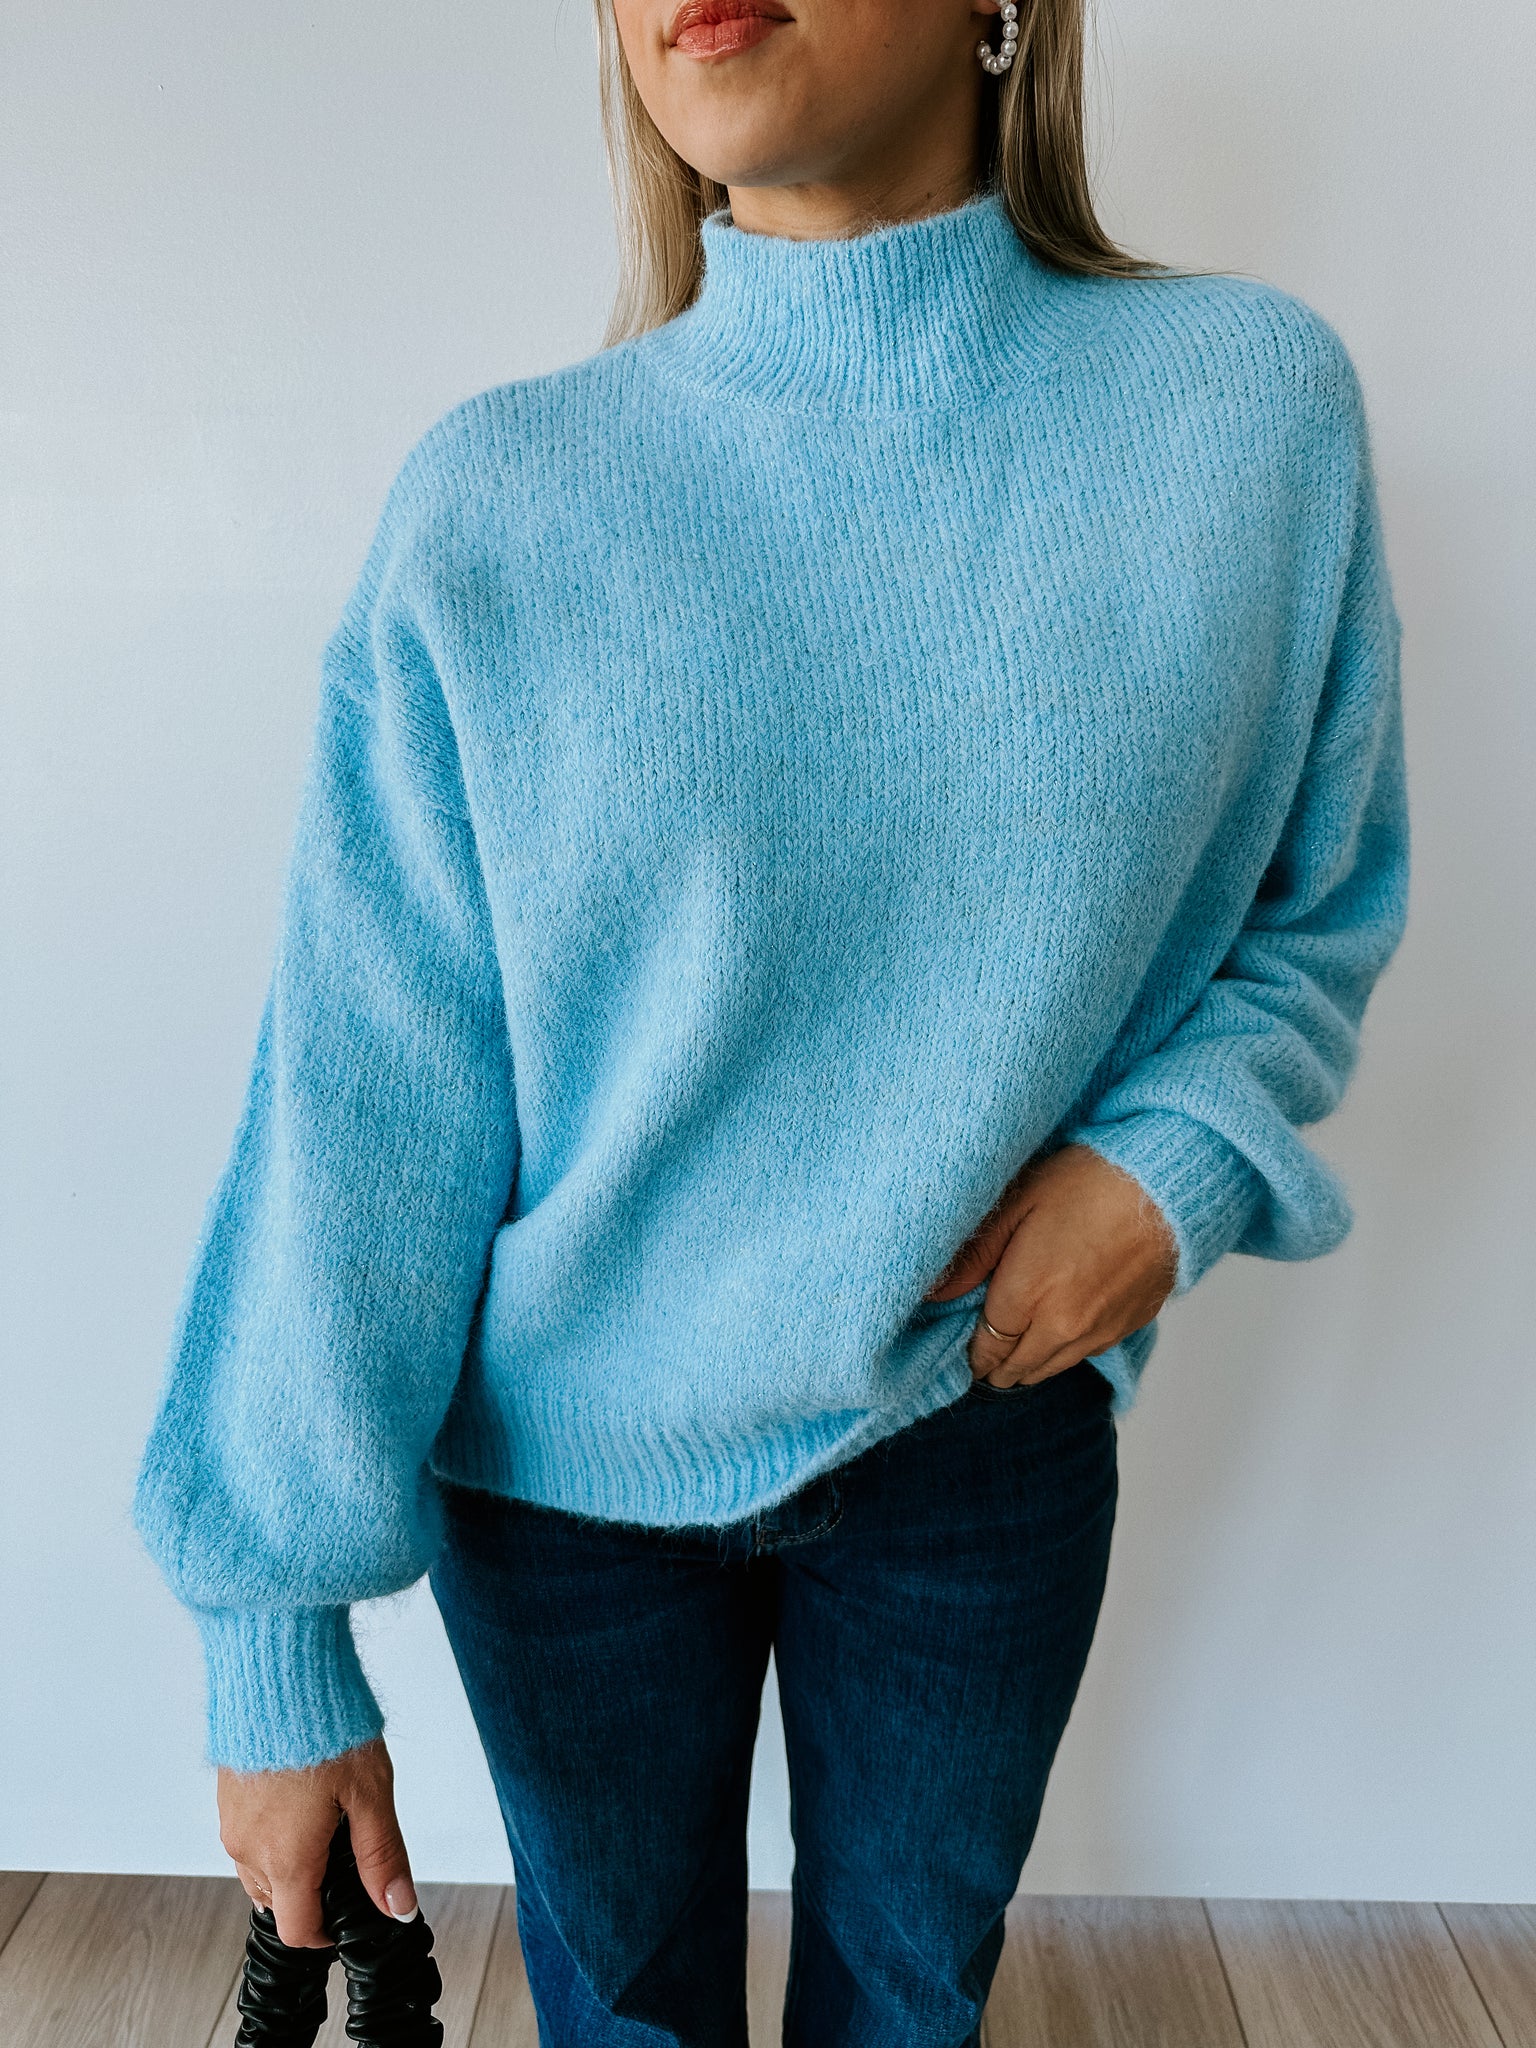 Shimmery Ice Sweater